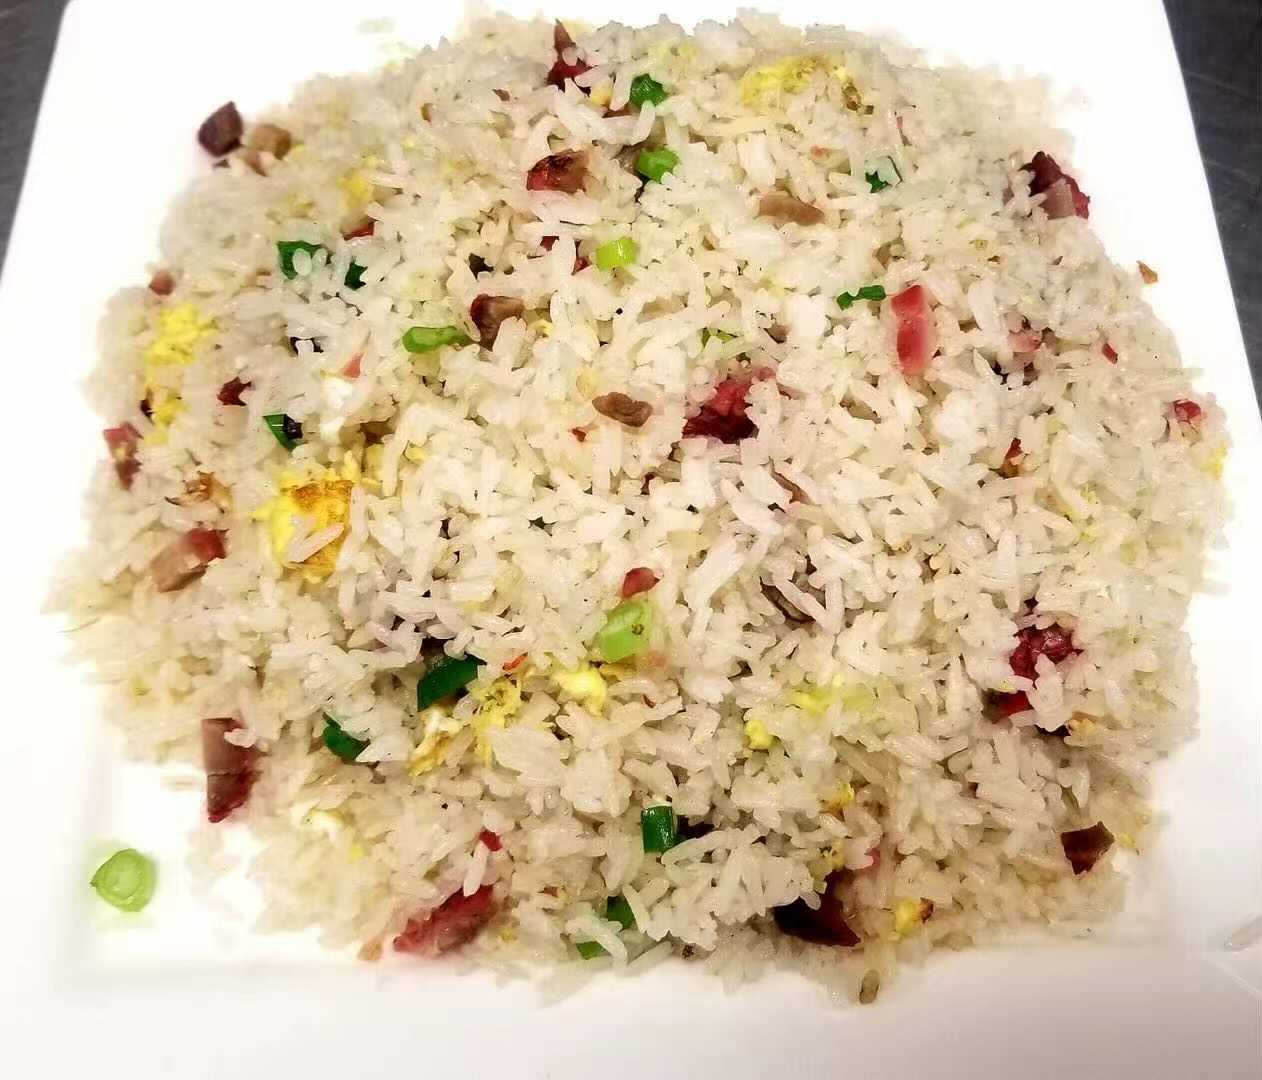 226. Barbecue Pork Fried Rice